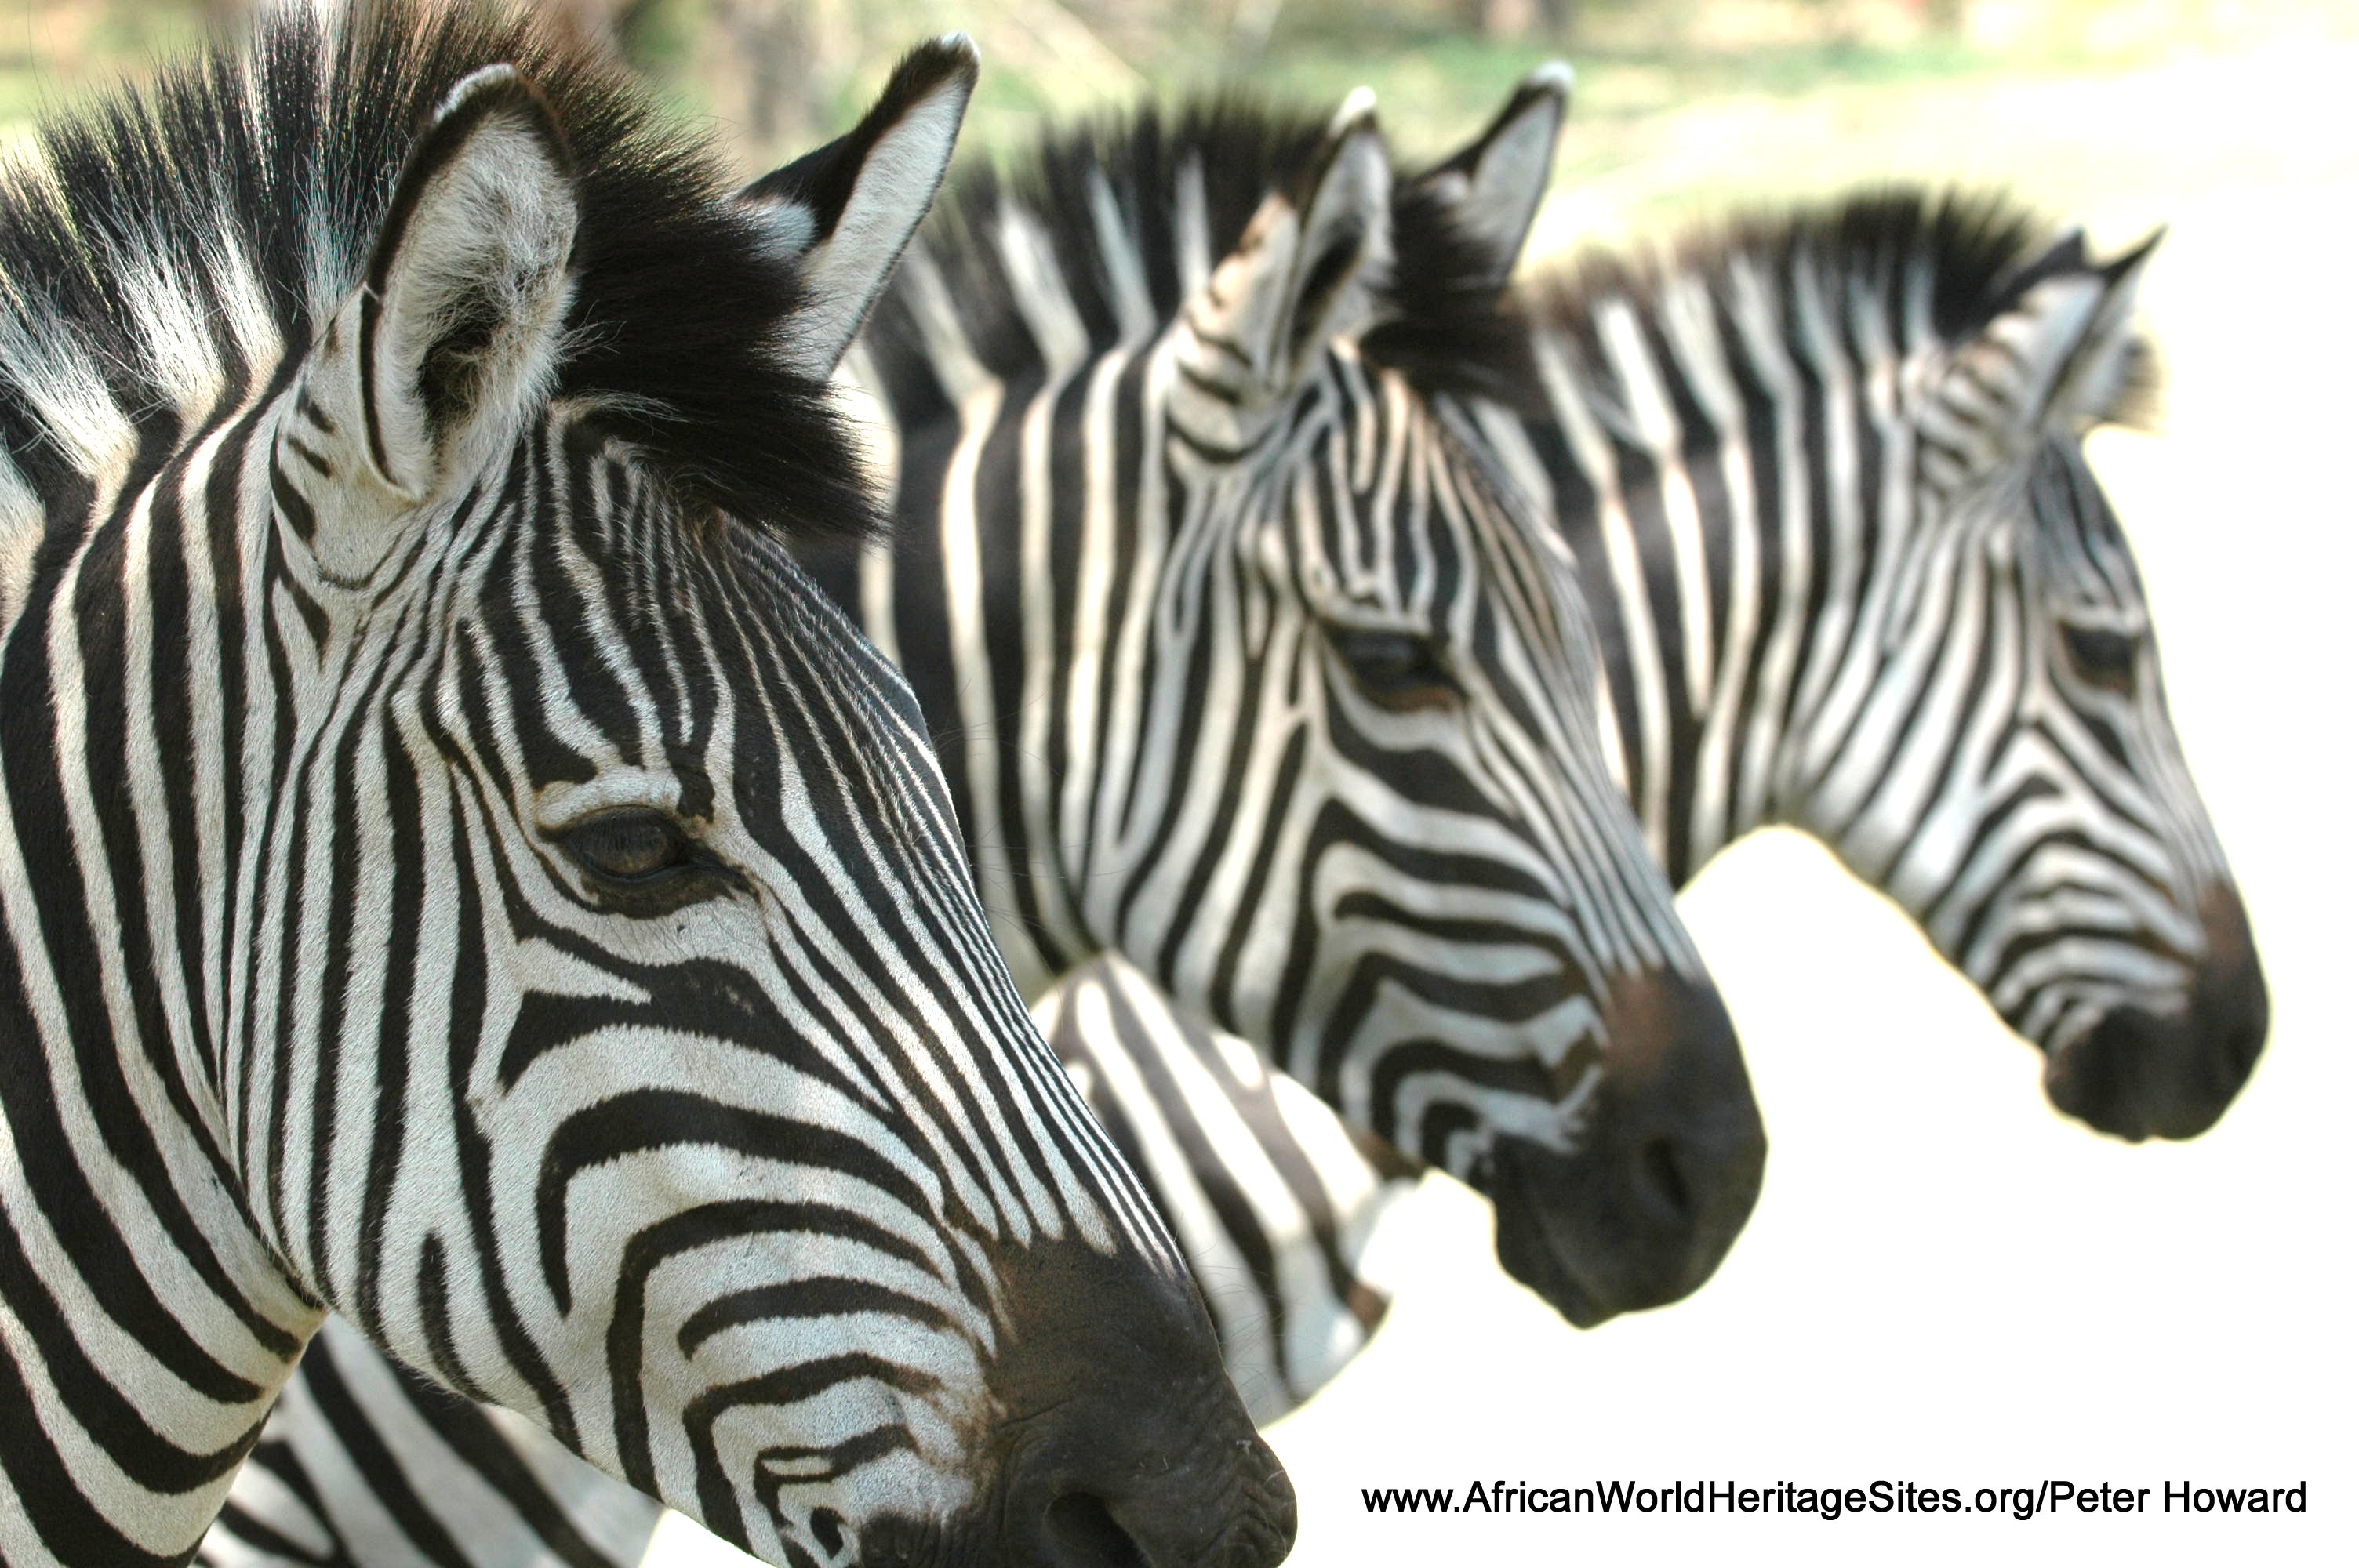 Zebras are amongst the wealth of big game animals to be seen in the Victoria Falls (Mosi-oa-tunya) National Parks and surrounding areas